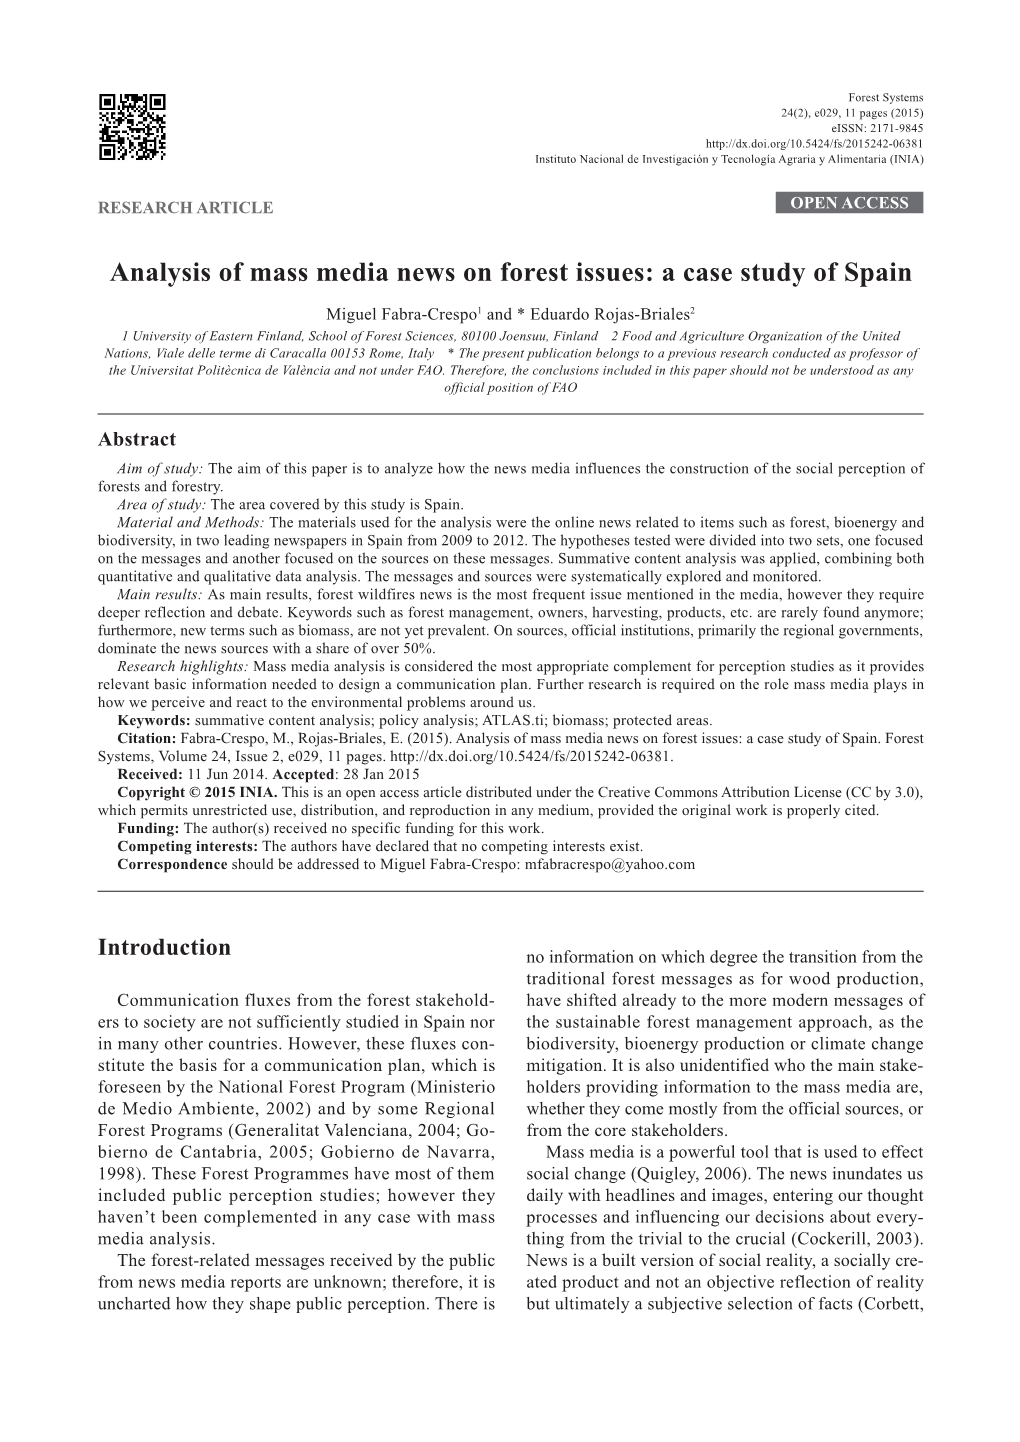 Analysis of Mass Media News on Forest Issues: a Case Study of Spain